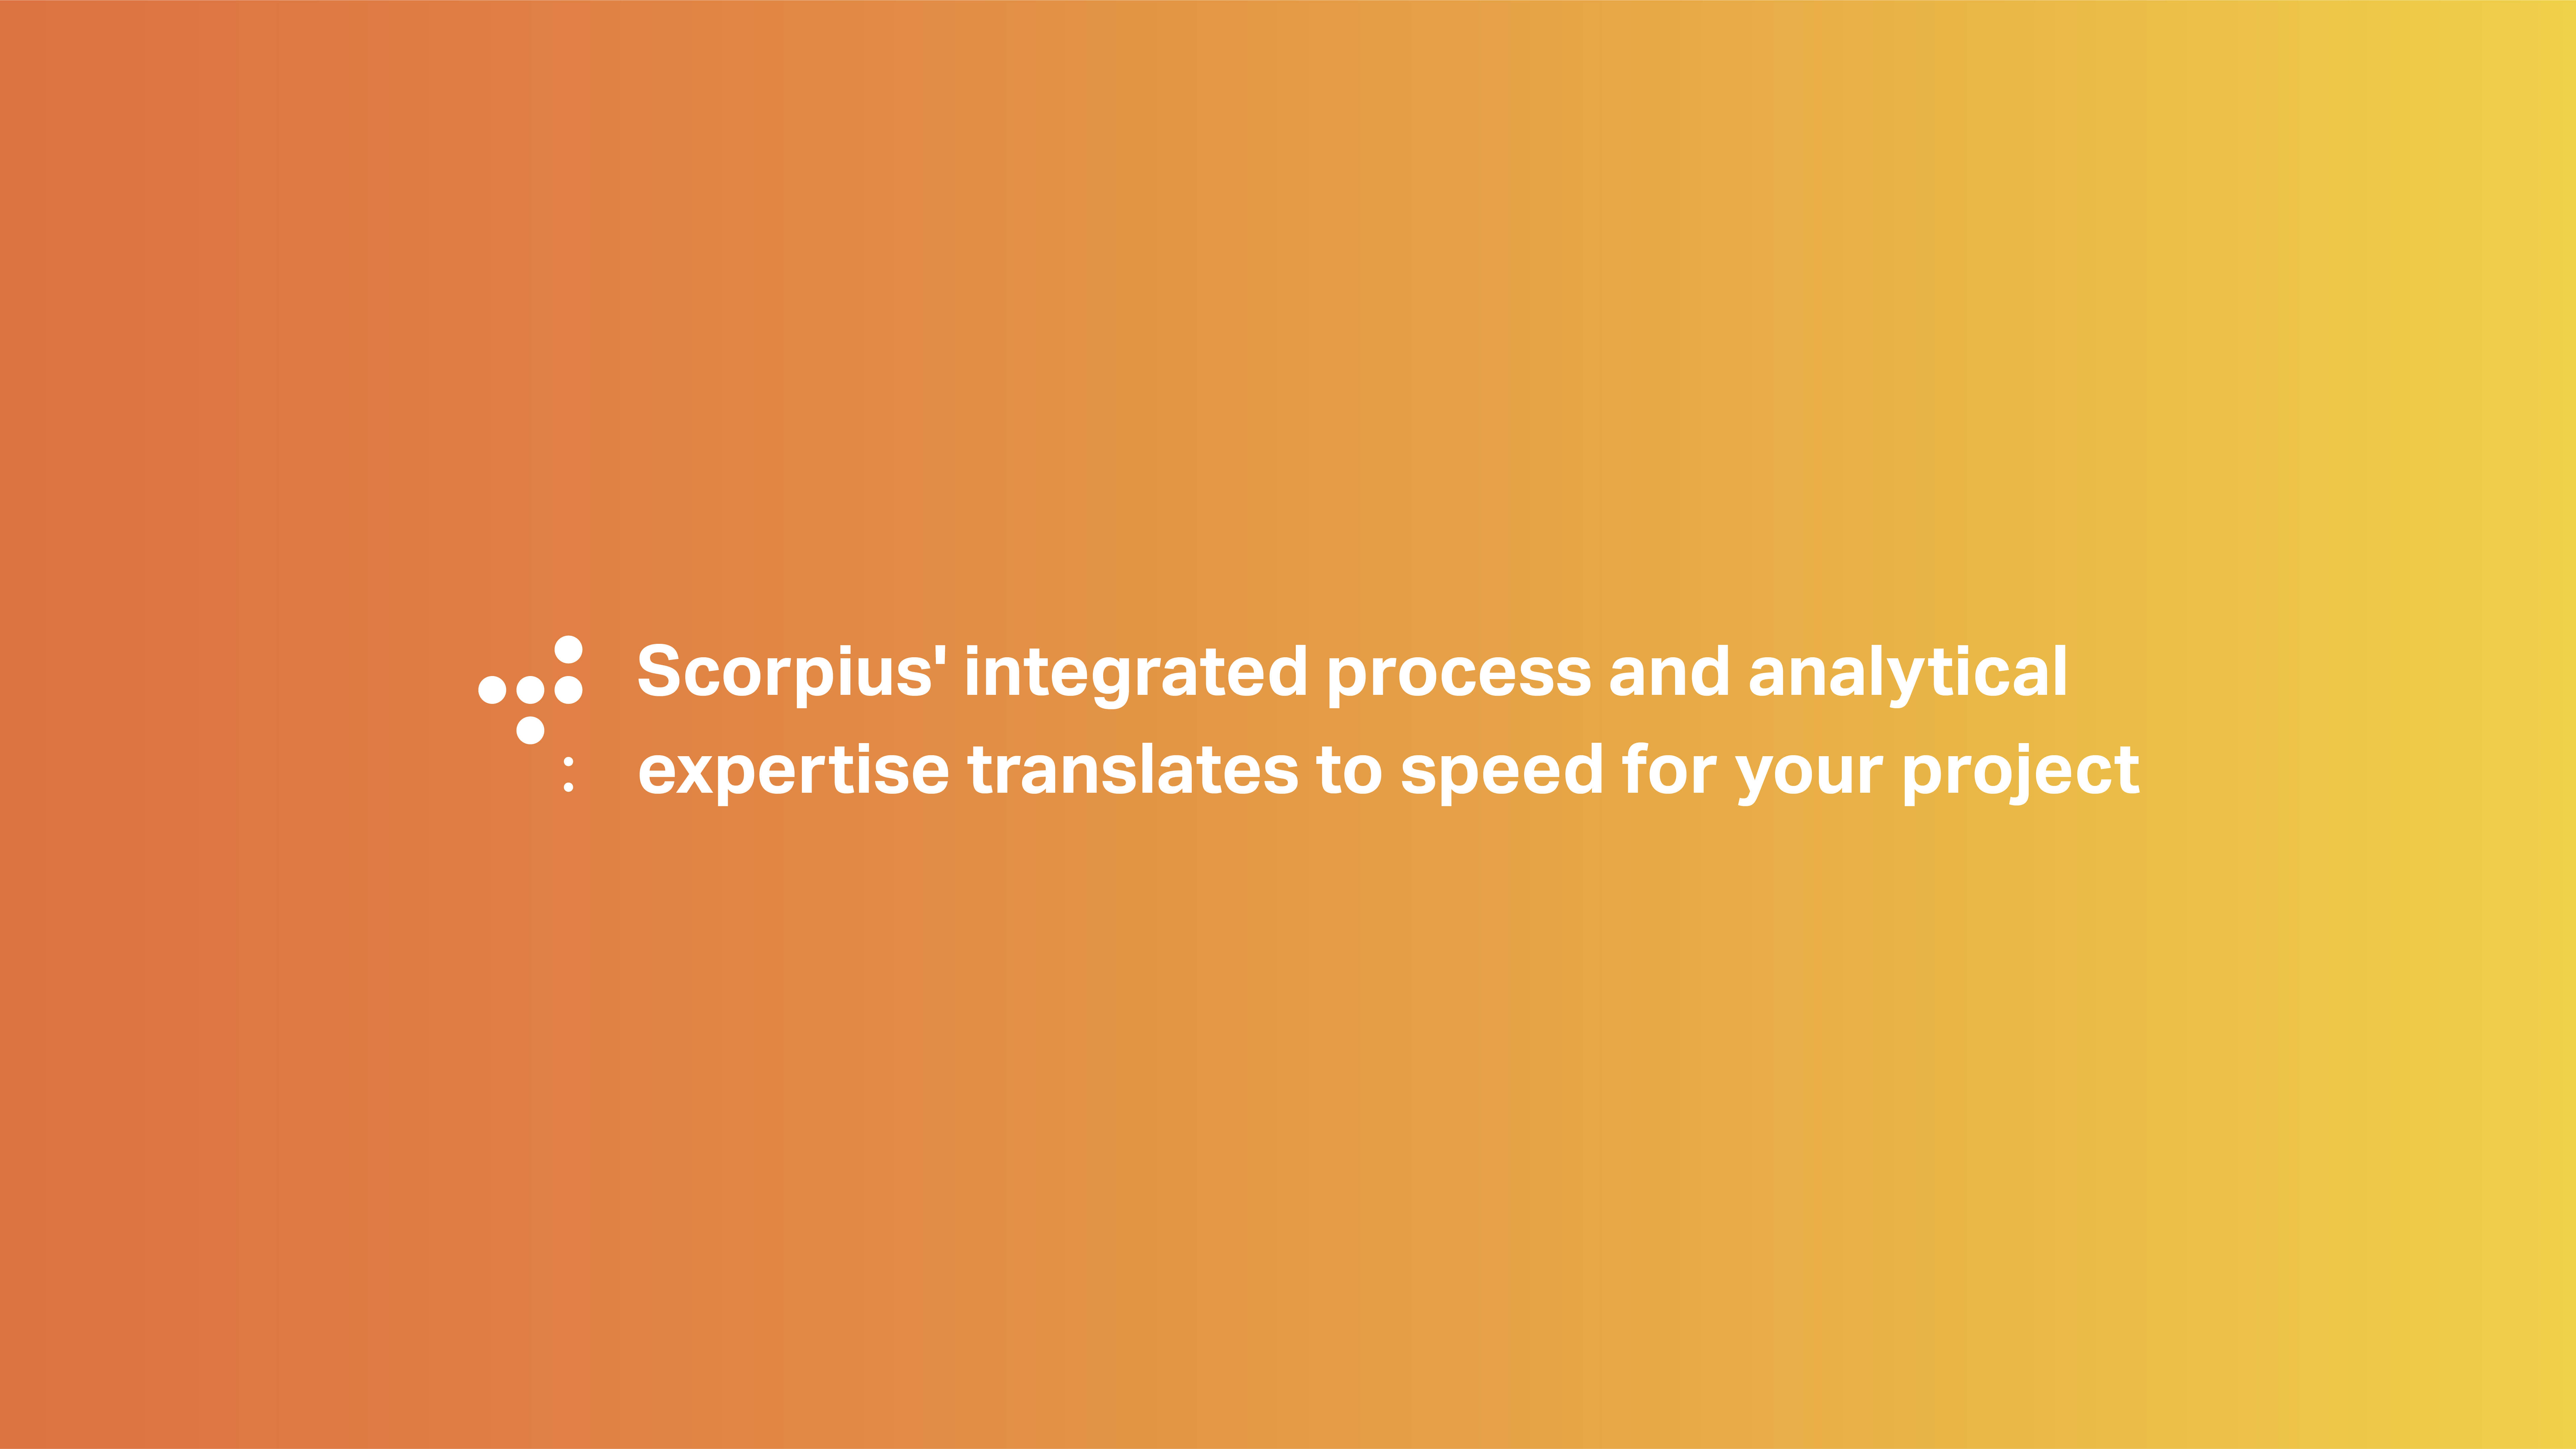 Scorpius' integrated process and analytical expertise translates to speed for your project